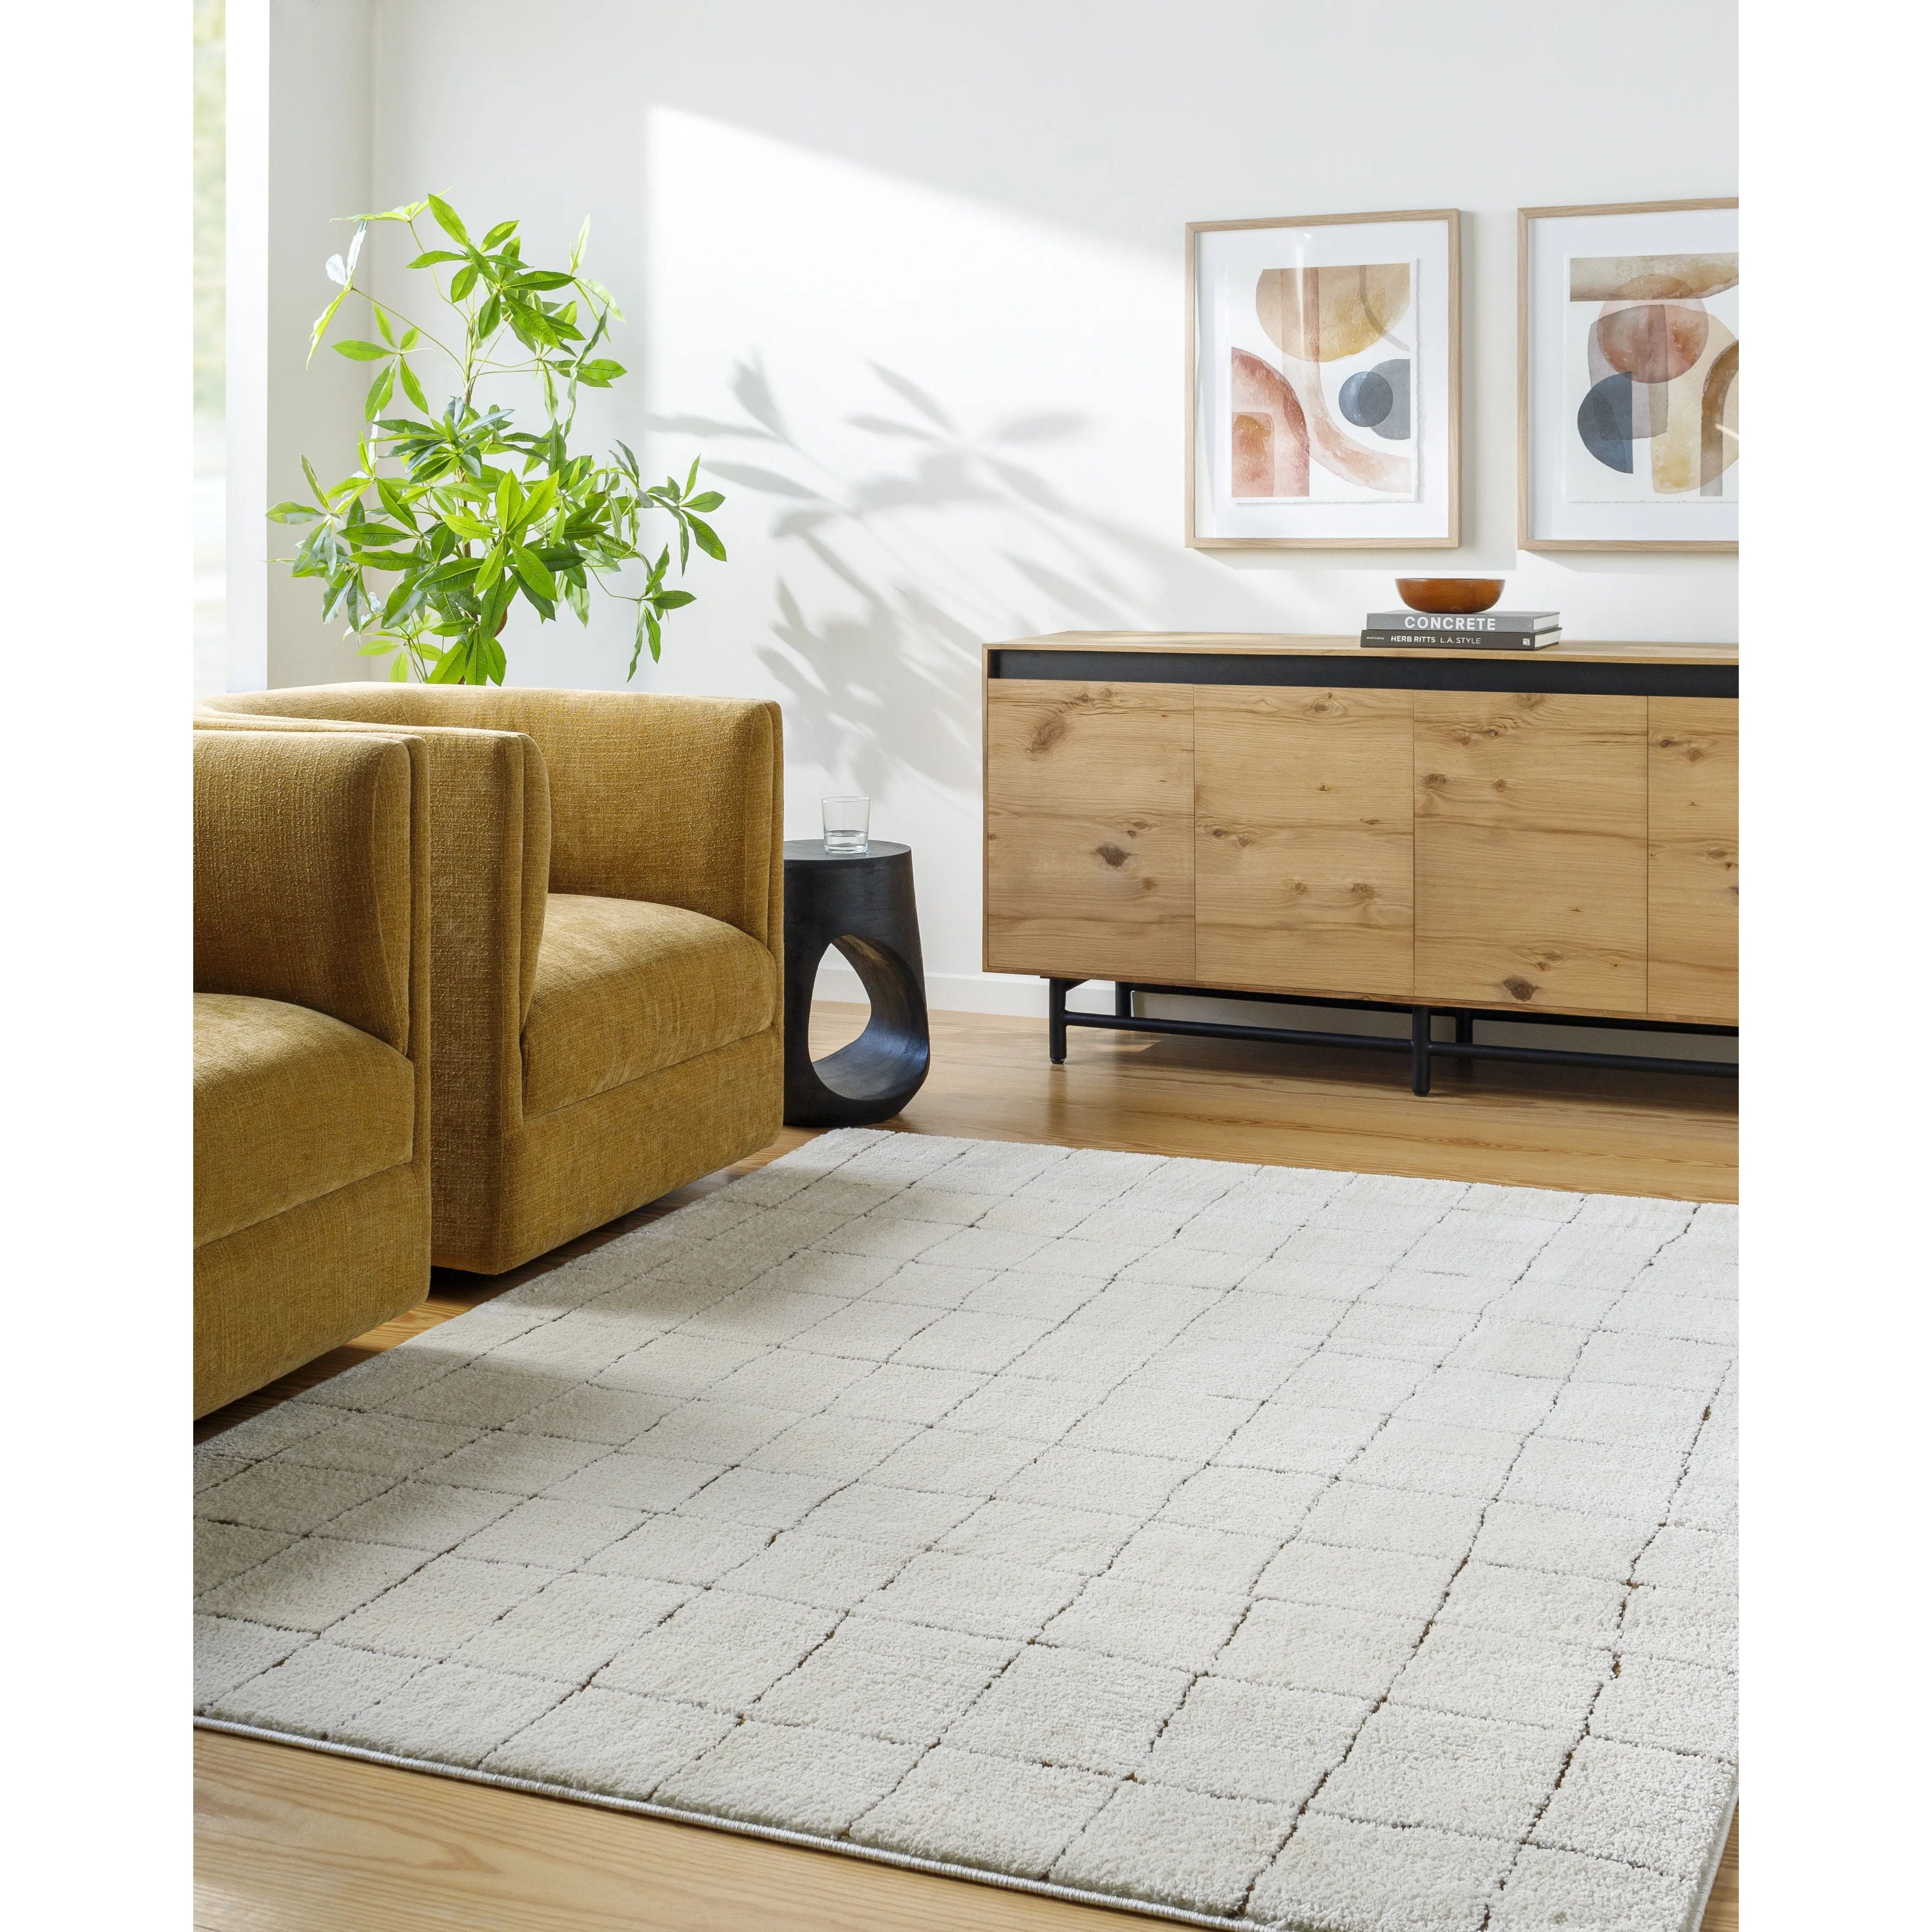 PNW Home x Surya available at Amethyst Home shipping to Australia, UK, and Canada. Organic modern design with easy to clean rugs for a family home in  the Washington metro area.